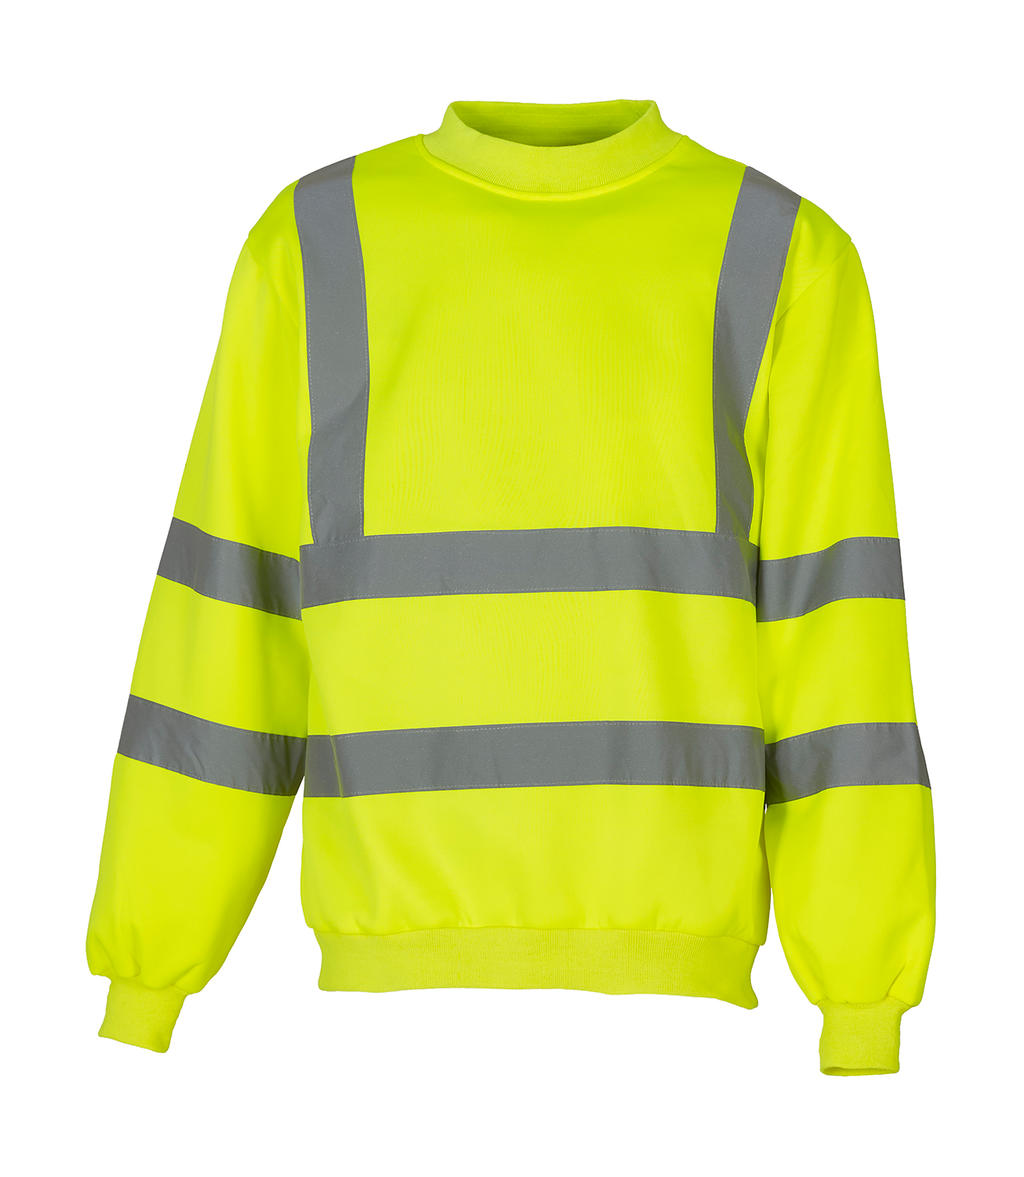 Fluo mikina - fluo yellow